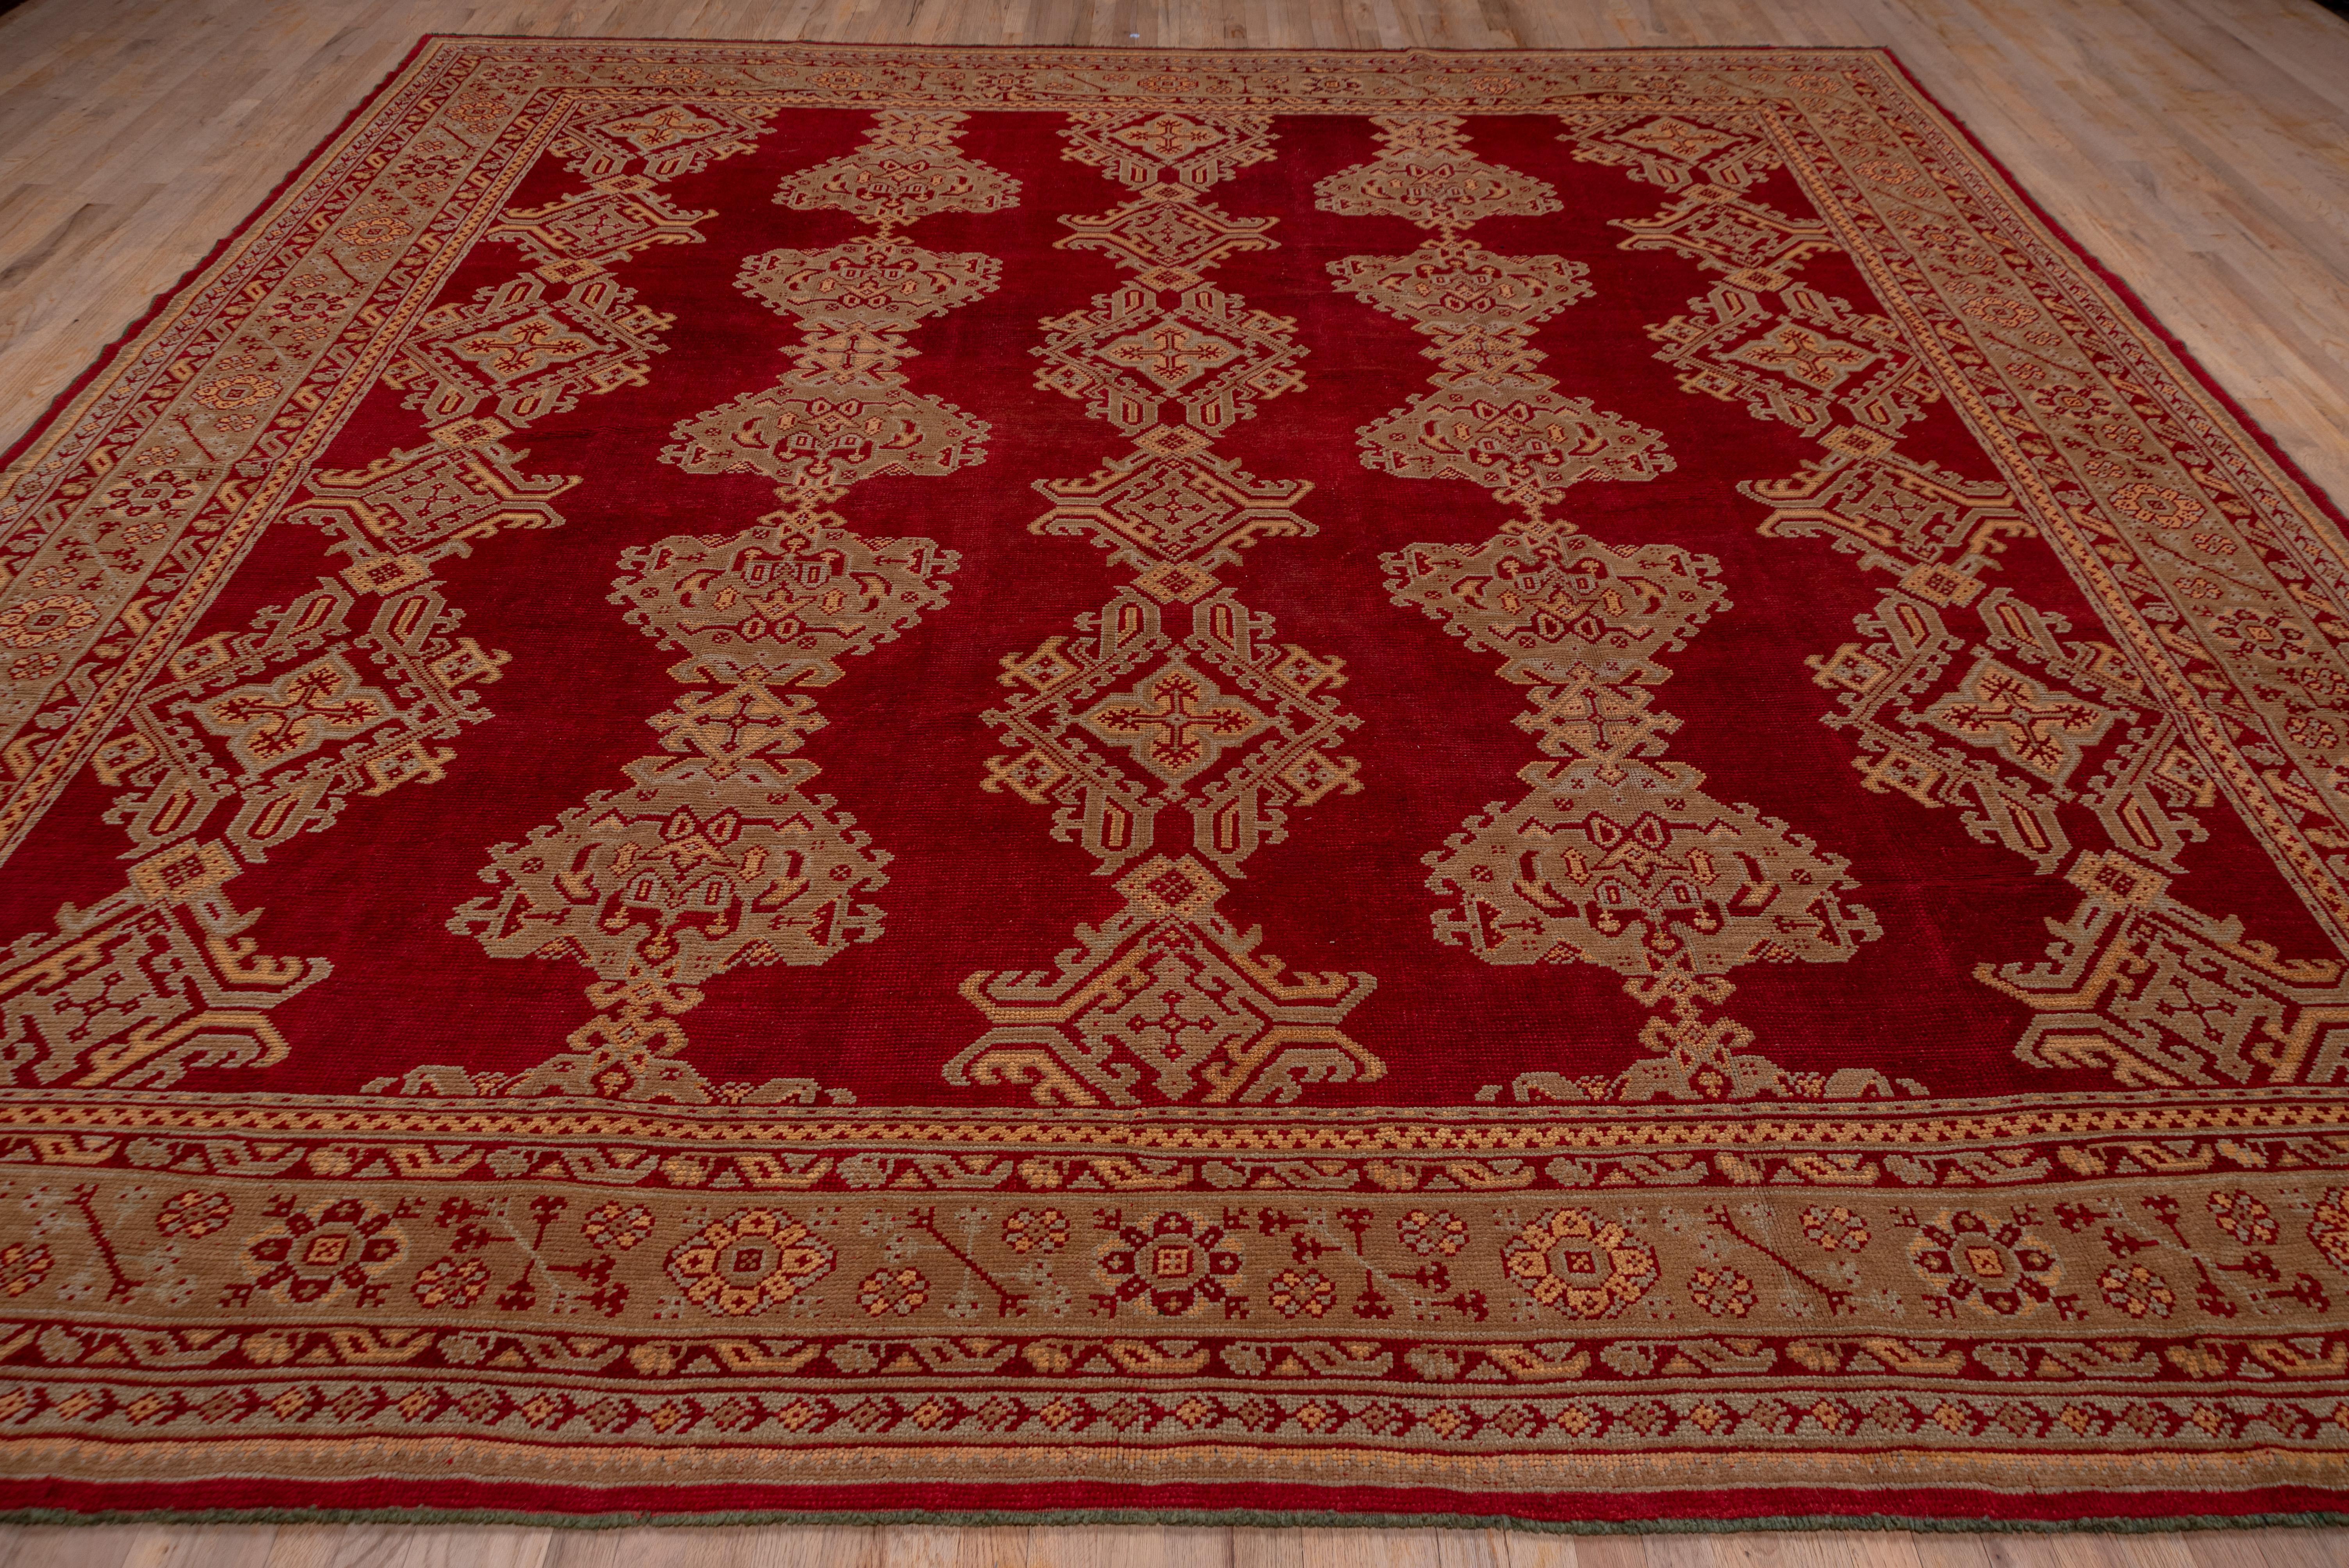 Mid-20th Century Antique Turkish Oushak Square Wool Rug, Red Allover Field, Circa 1920s For Sale